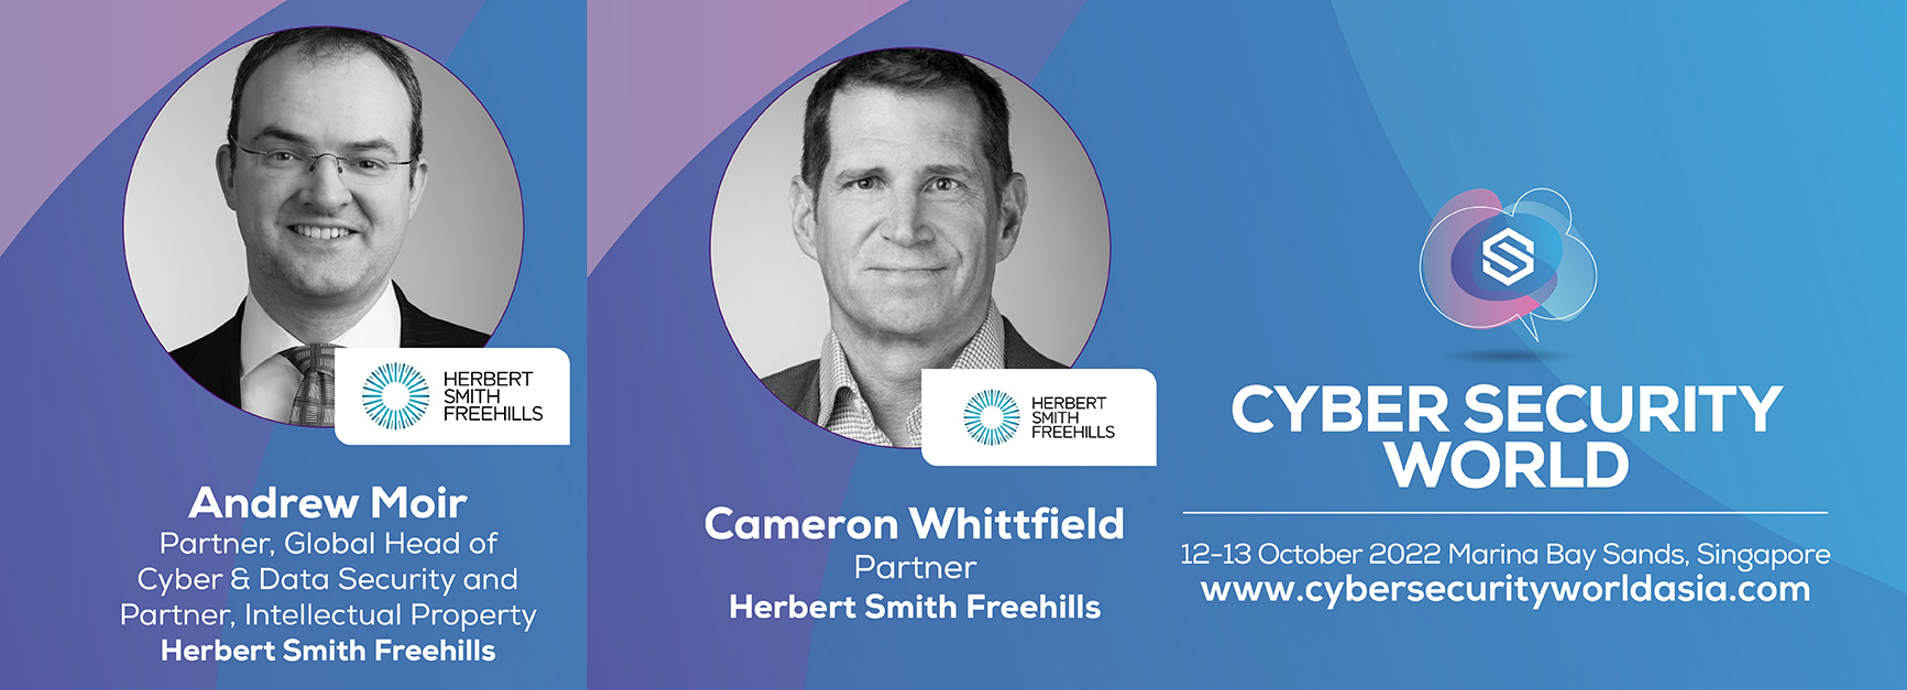 Cyber Security World Asia 2022: Enhancing Cyber Resilience with Herbert Smith Freehills' Andrew Moir, Cameron Whittfield, and Peggy Chow